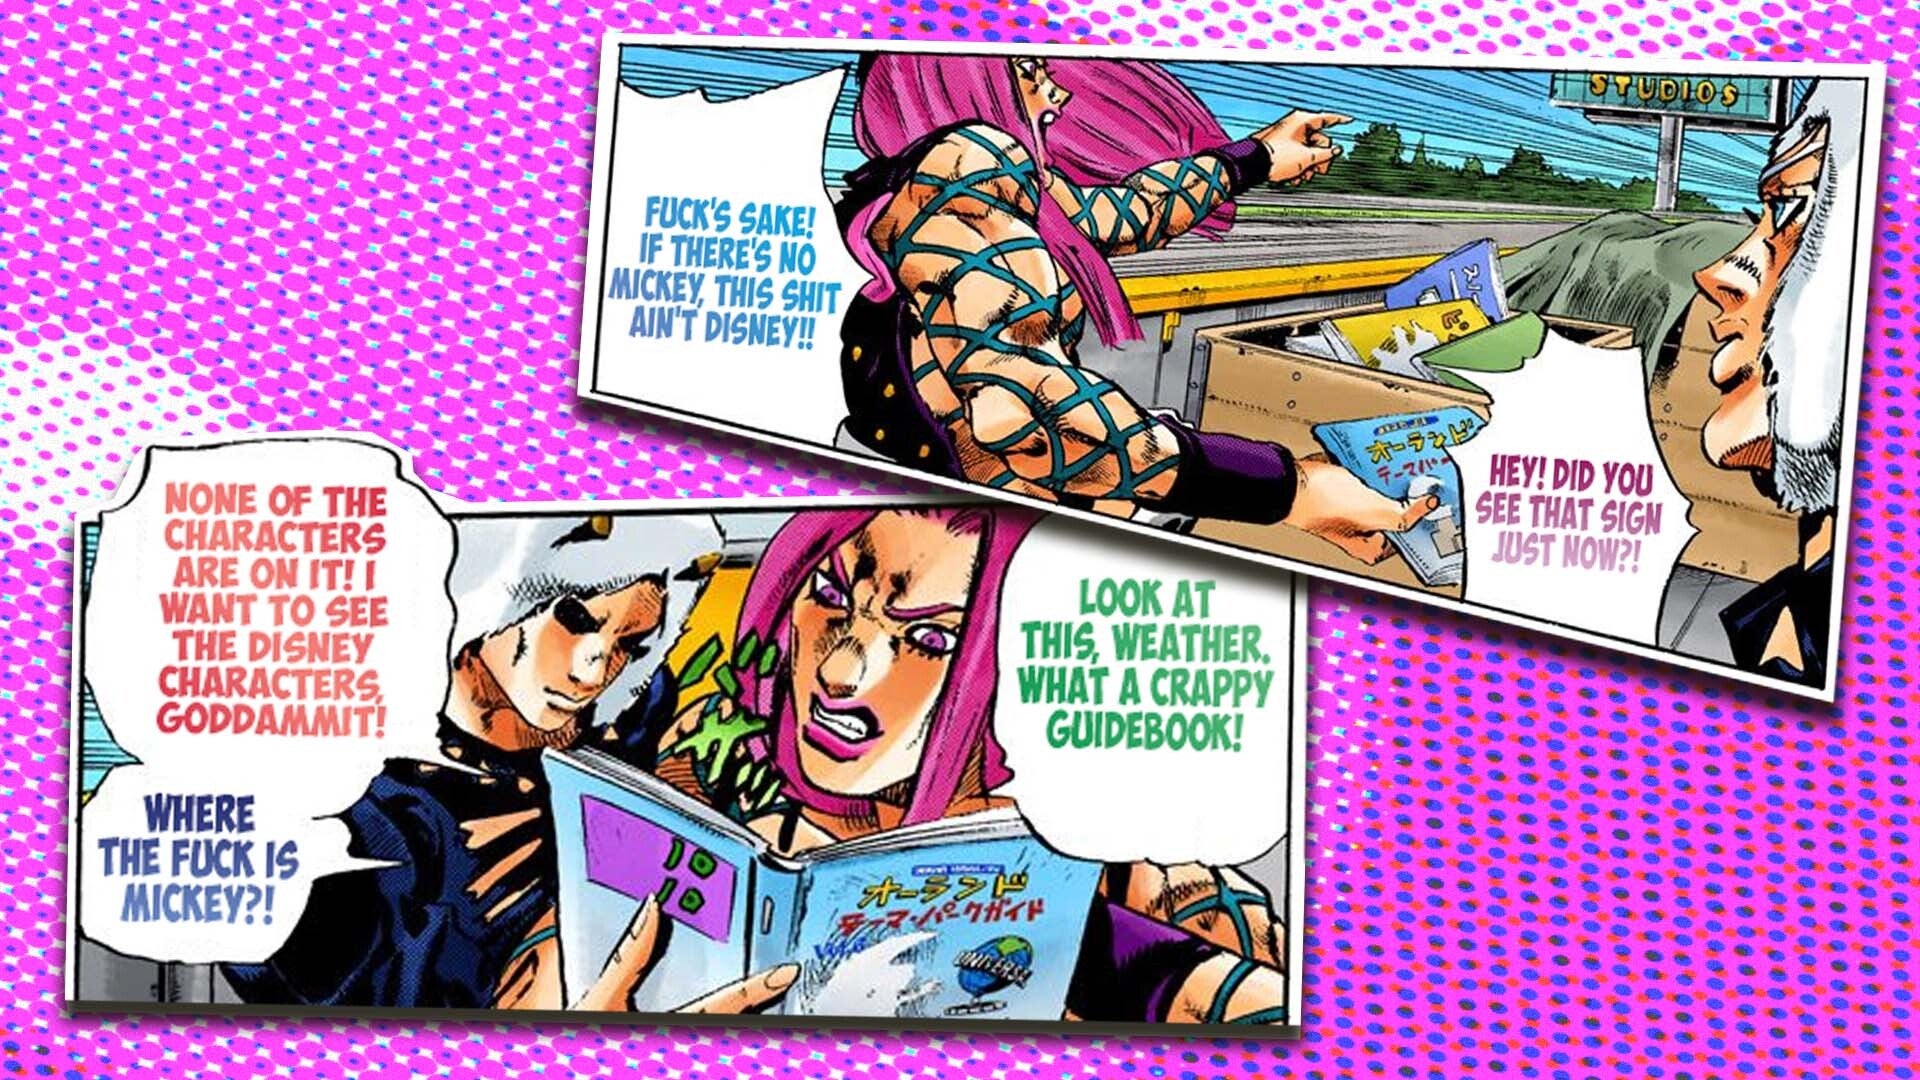 10 References To Previous JoJo Parts That You Missed In The Stone Ocean  Opening